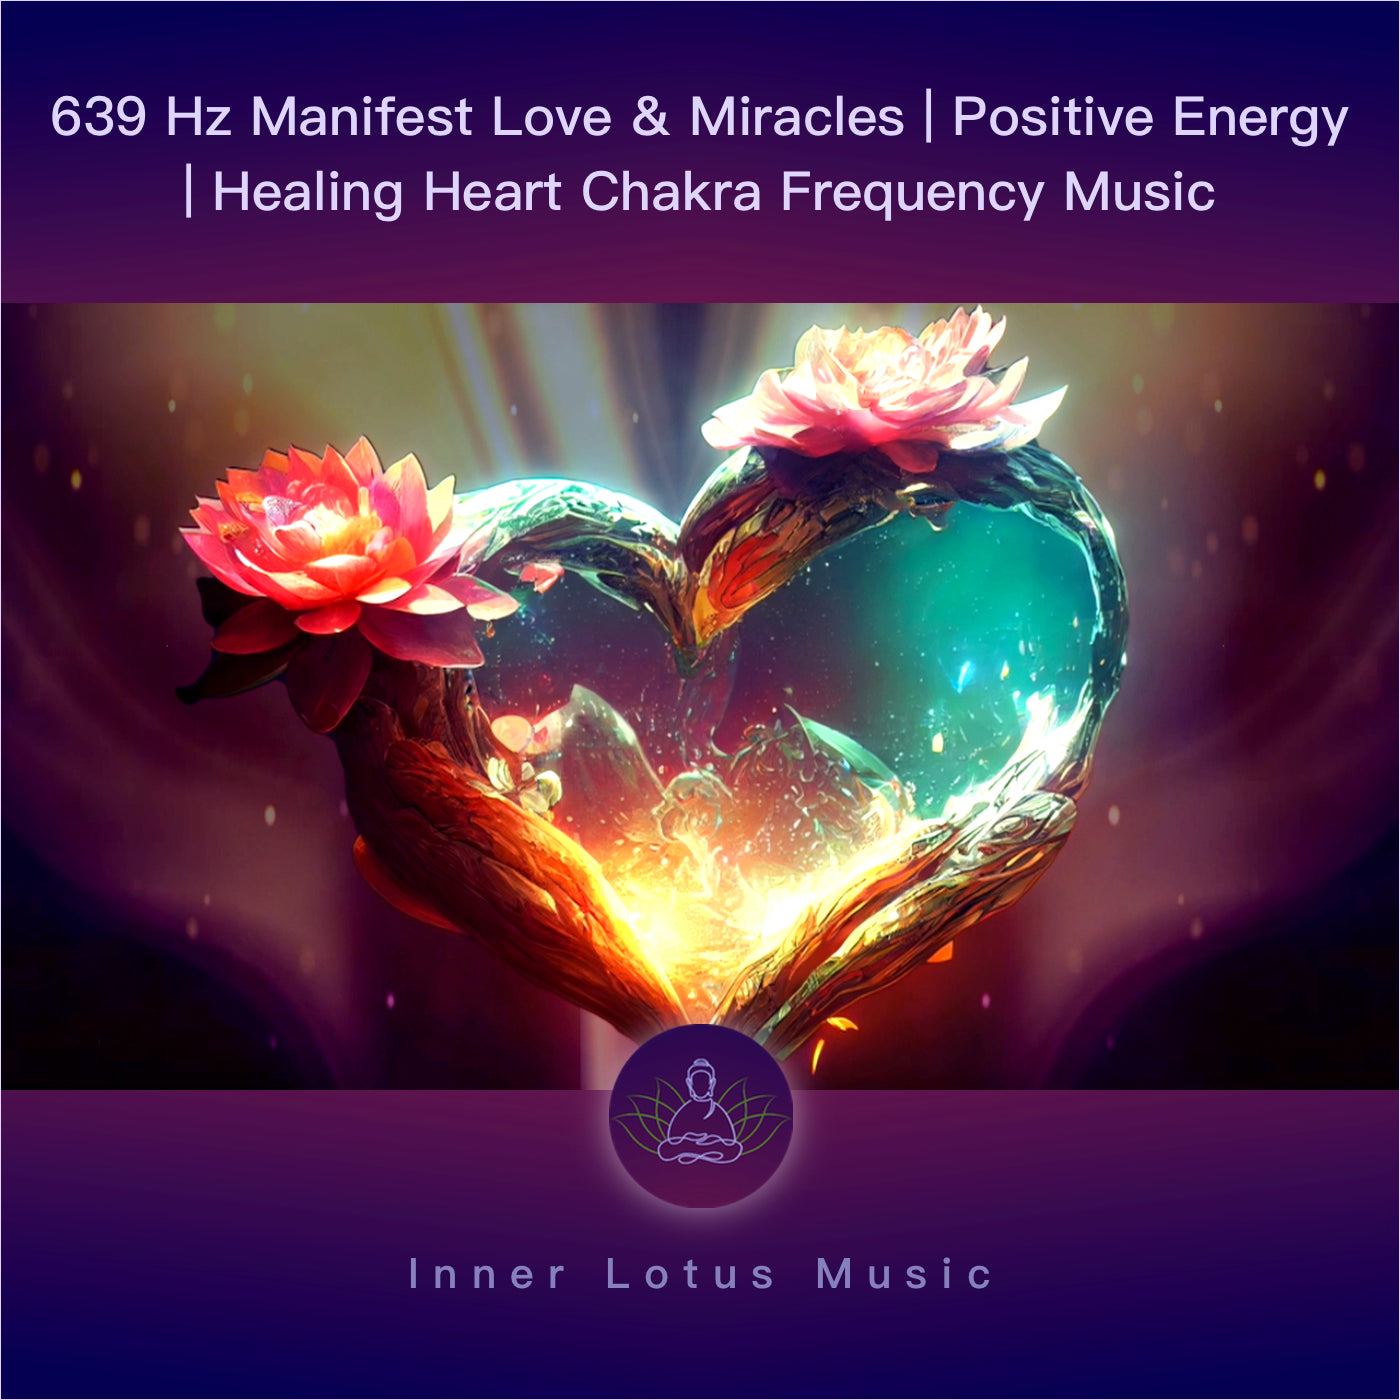 639 Hz Manifest Love & Miracles Positive Energy Healing Heart Chakra Frequency Meditation Music